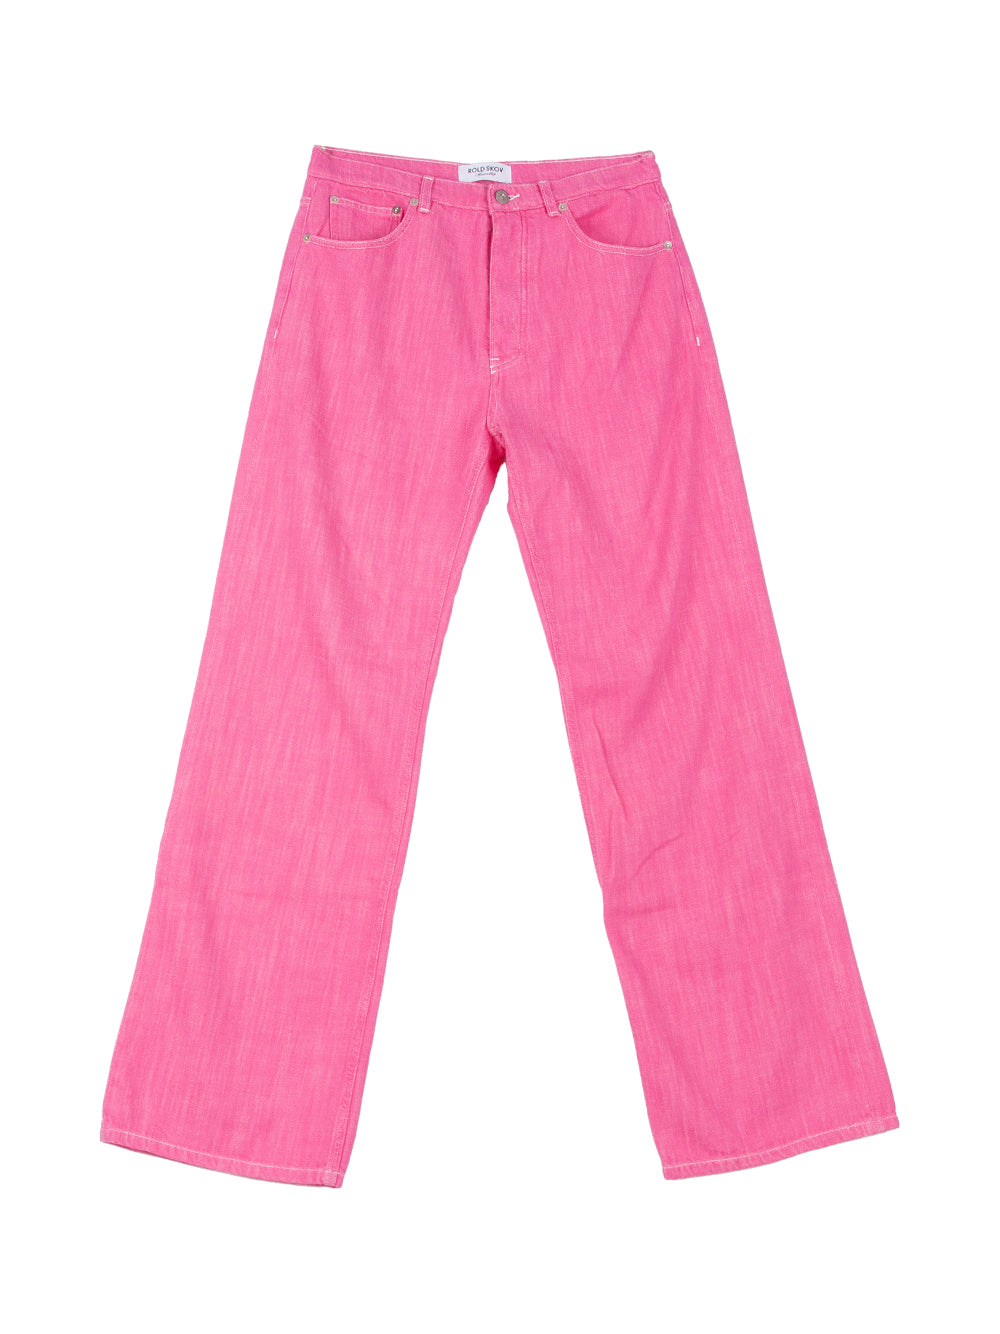 Faded Pink Boot Cut Jeans